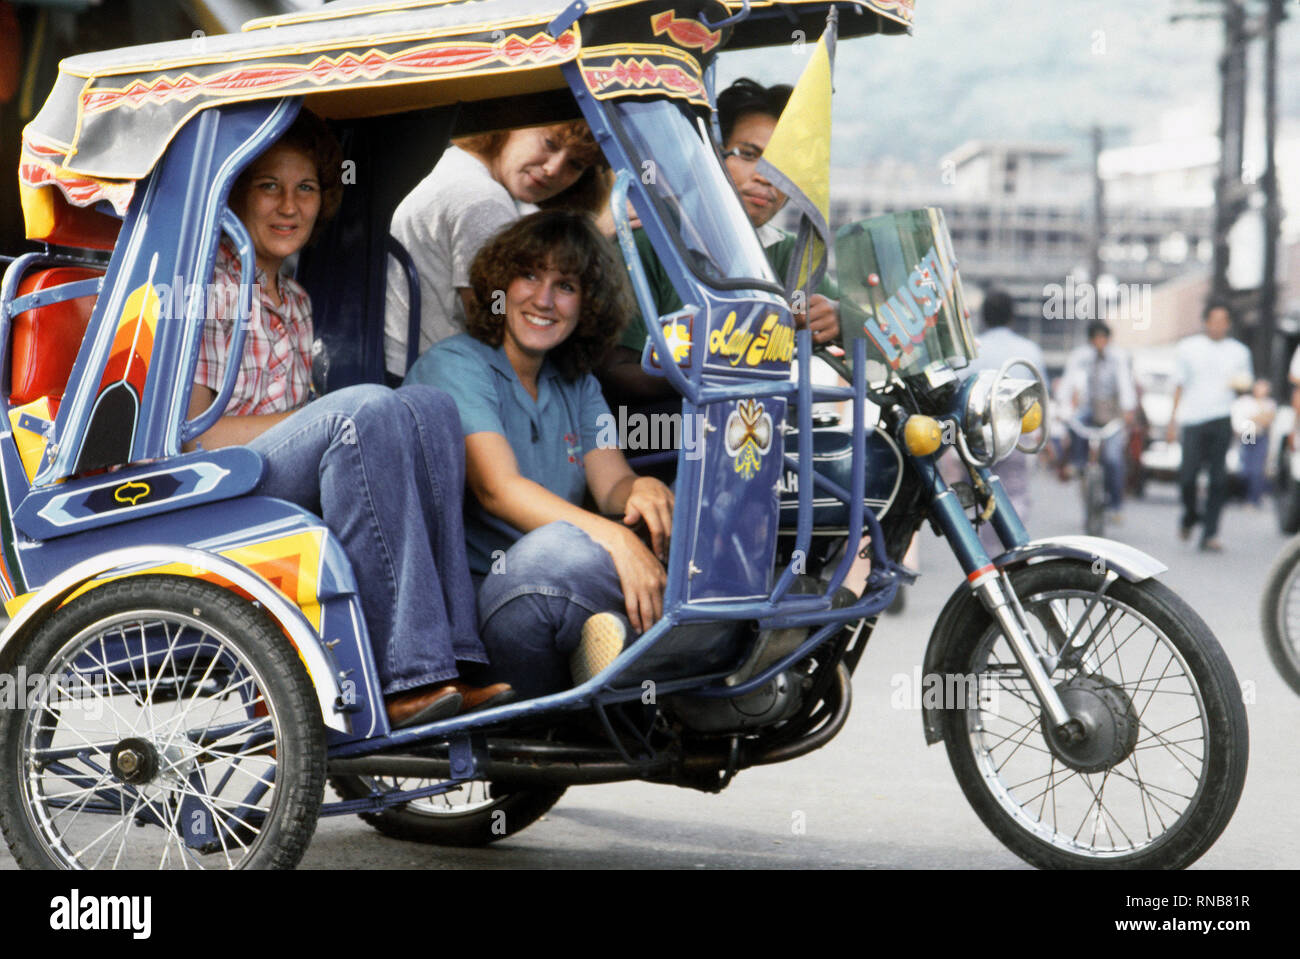 1982 - Philippines - Dependent wives of crewmen from the guided missile cruiser USS STERETT (CG-31) ride in a jeepney, a form of local transportation. Stock Photo